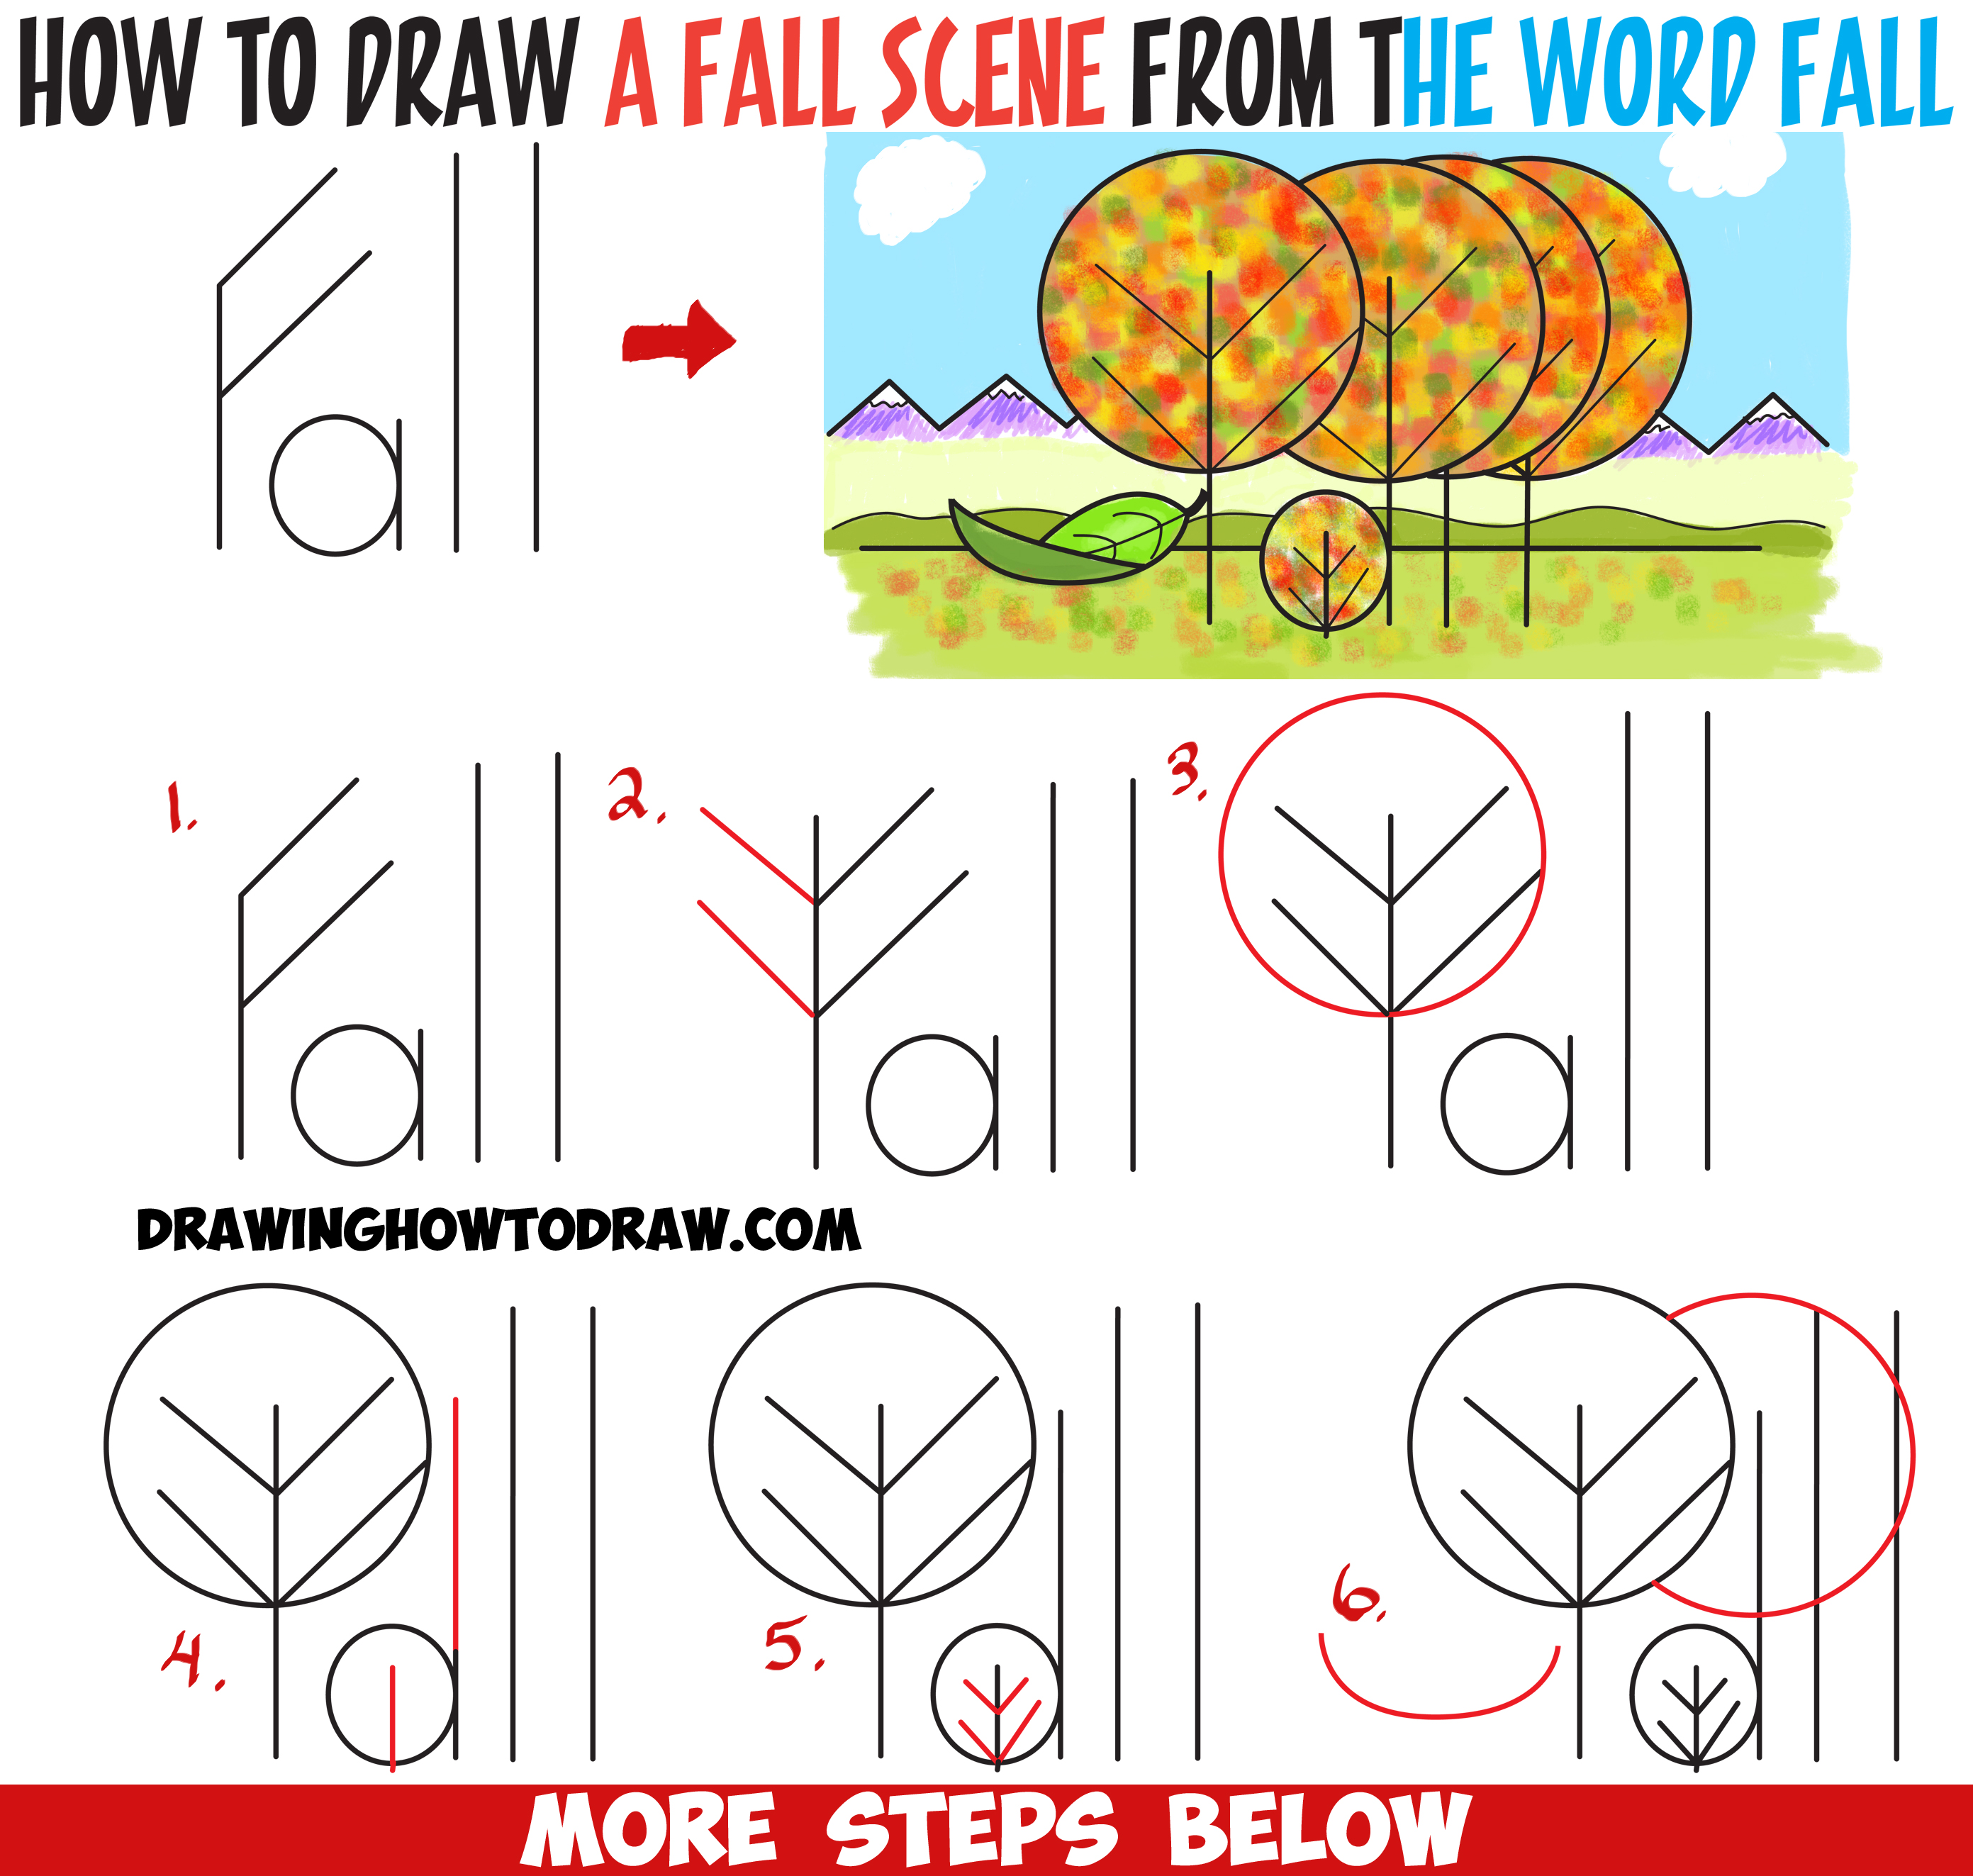 How to Draw Fall / Autumn Scene from the Word "Fall" Easy Cartoon